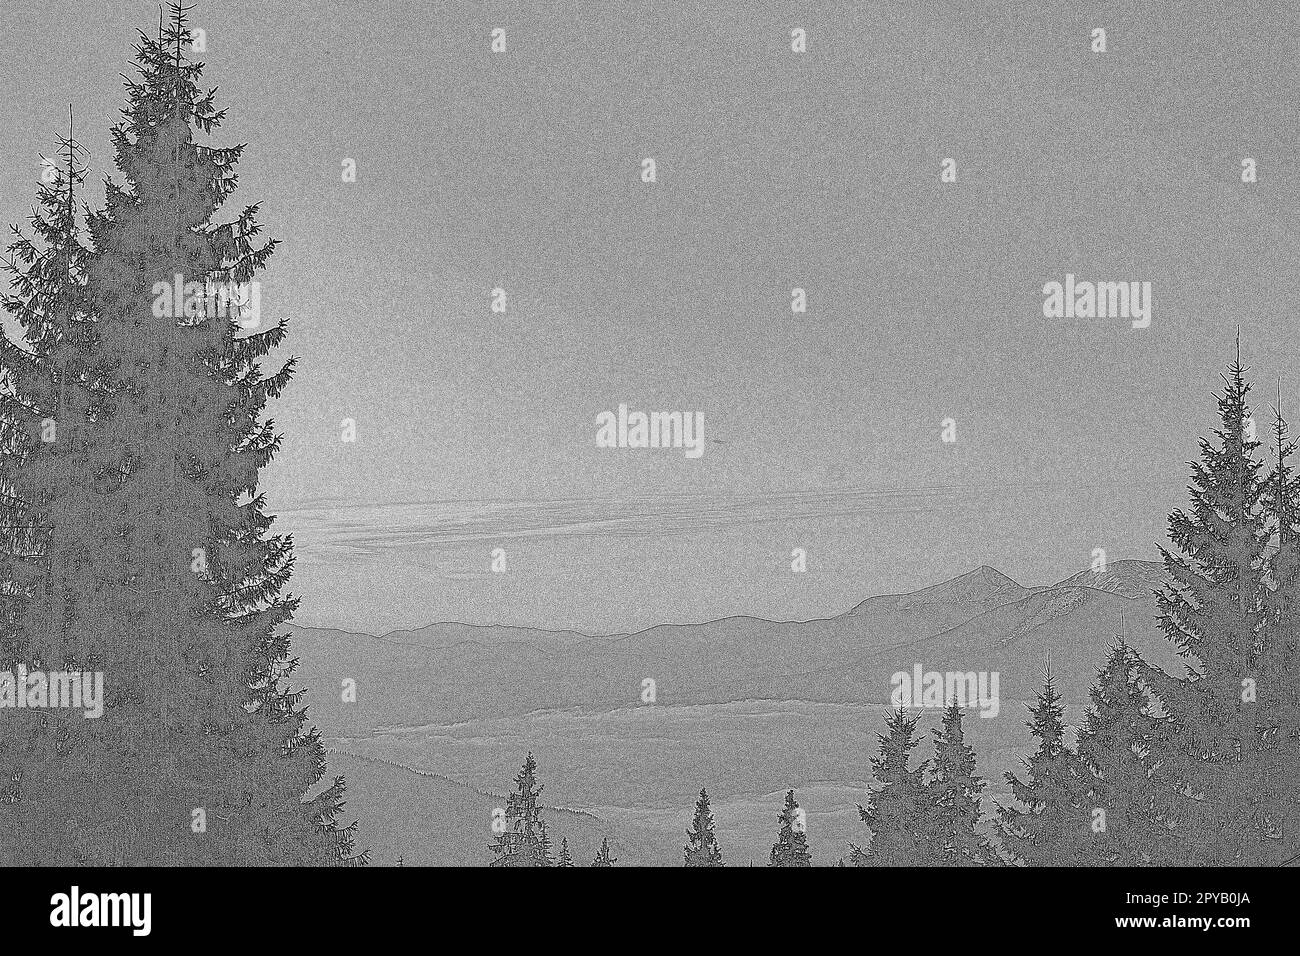 Peaceful view on mountain ranges, spruces engraving hand drawn sketch Stock Photo